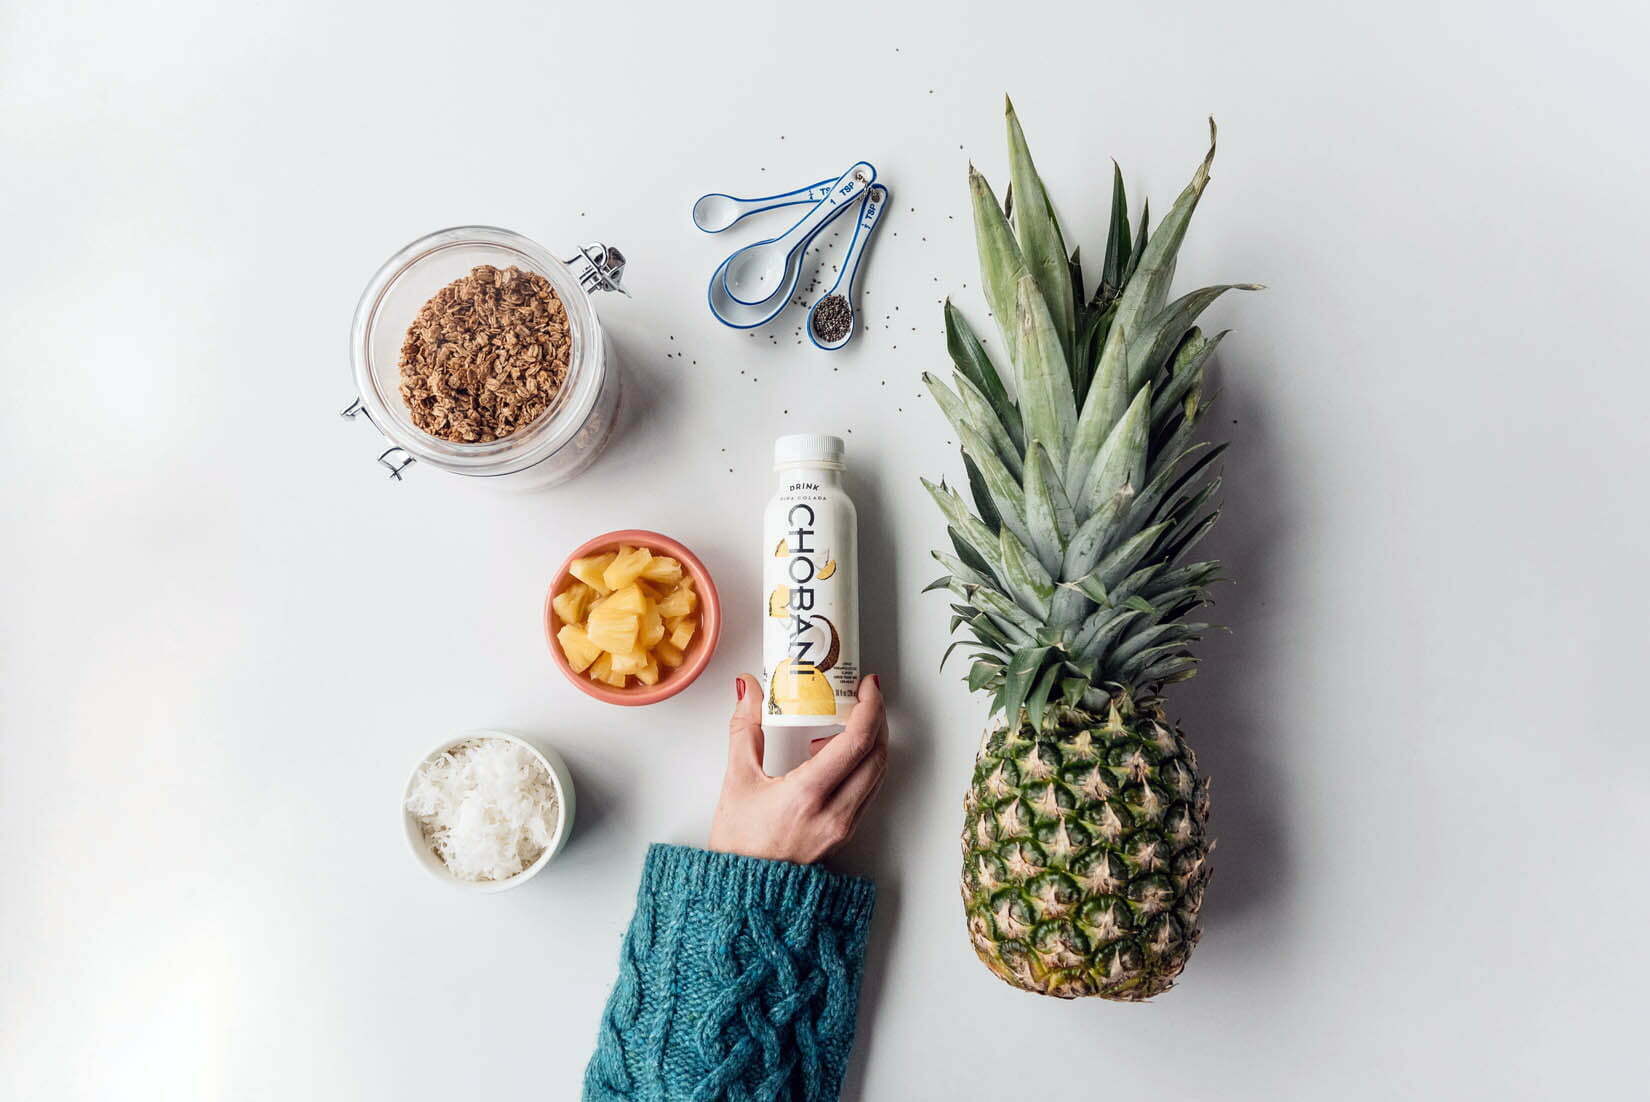 food blogger drinkchobani pineapple coconut smoothie recipe nutrition facts